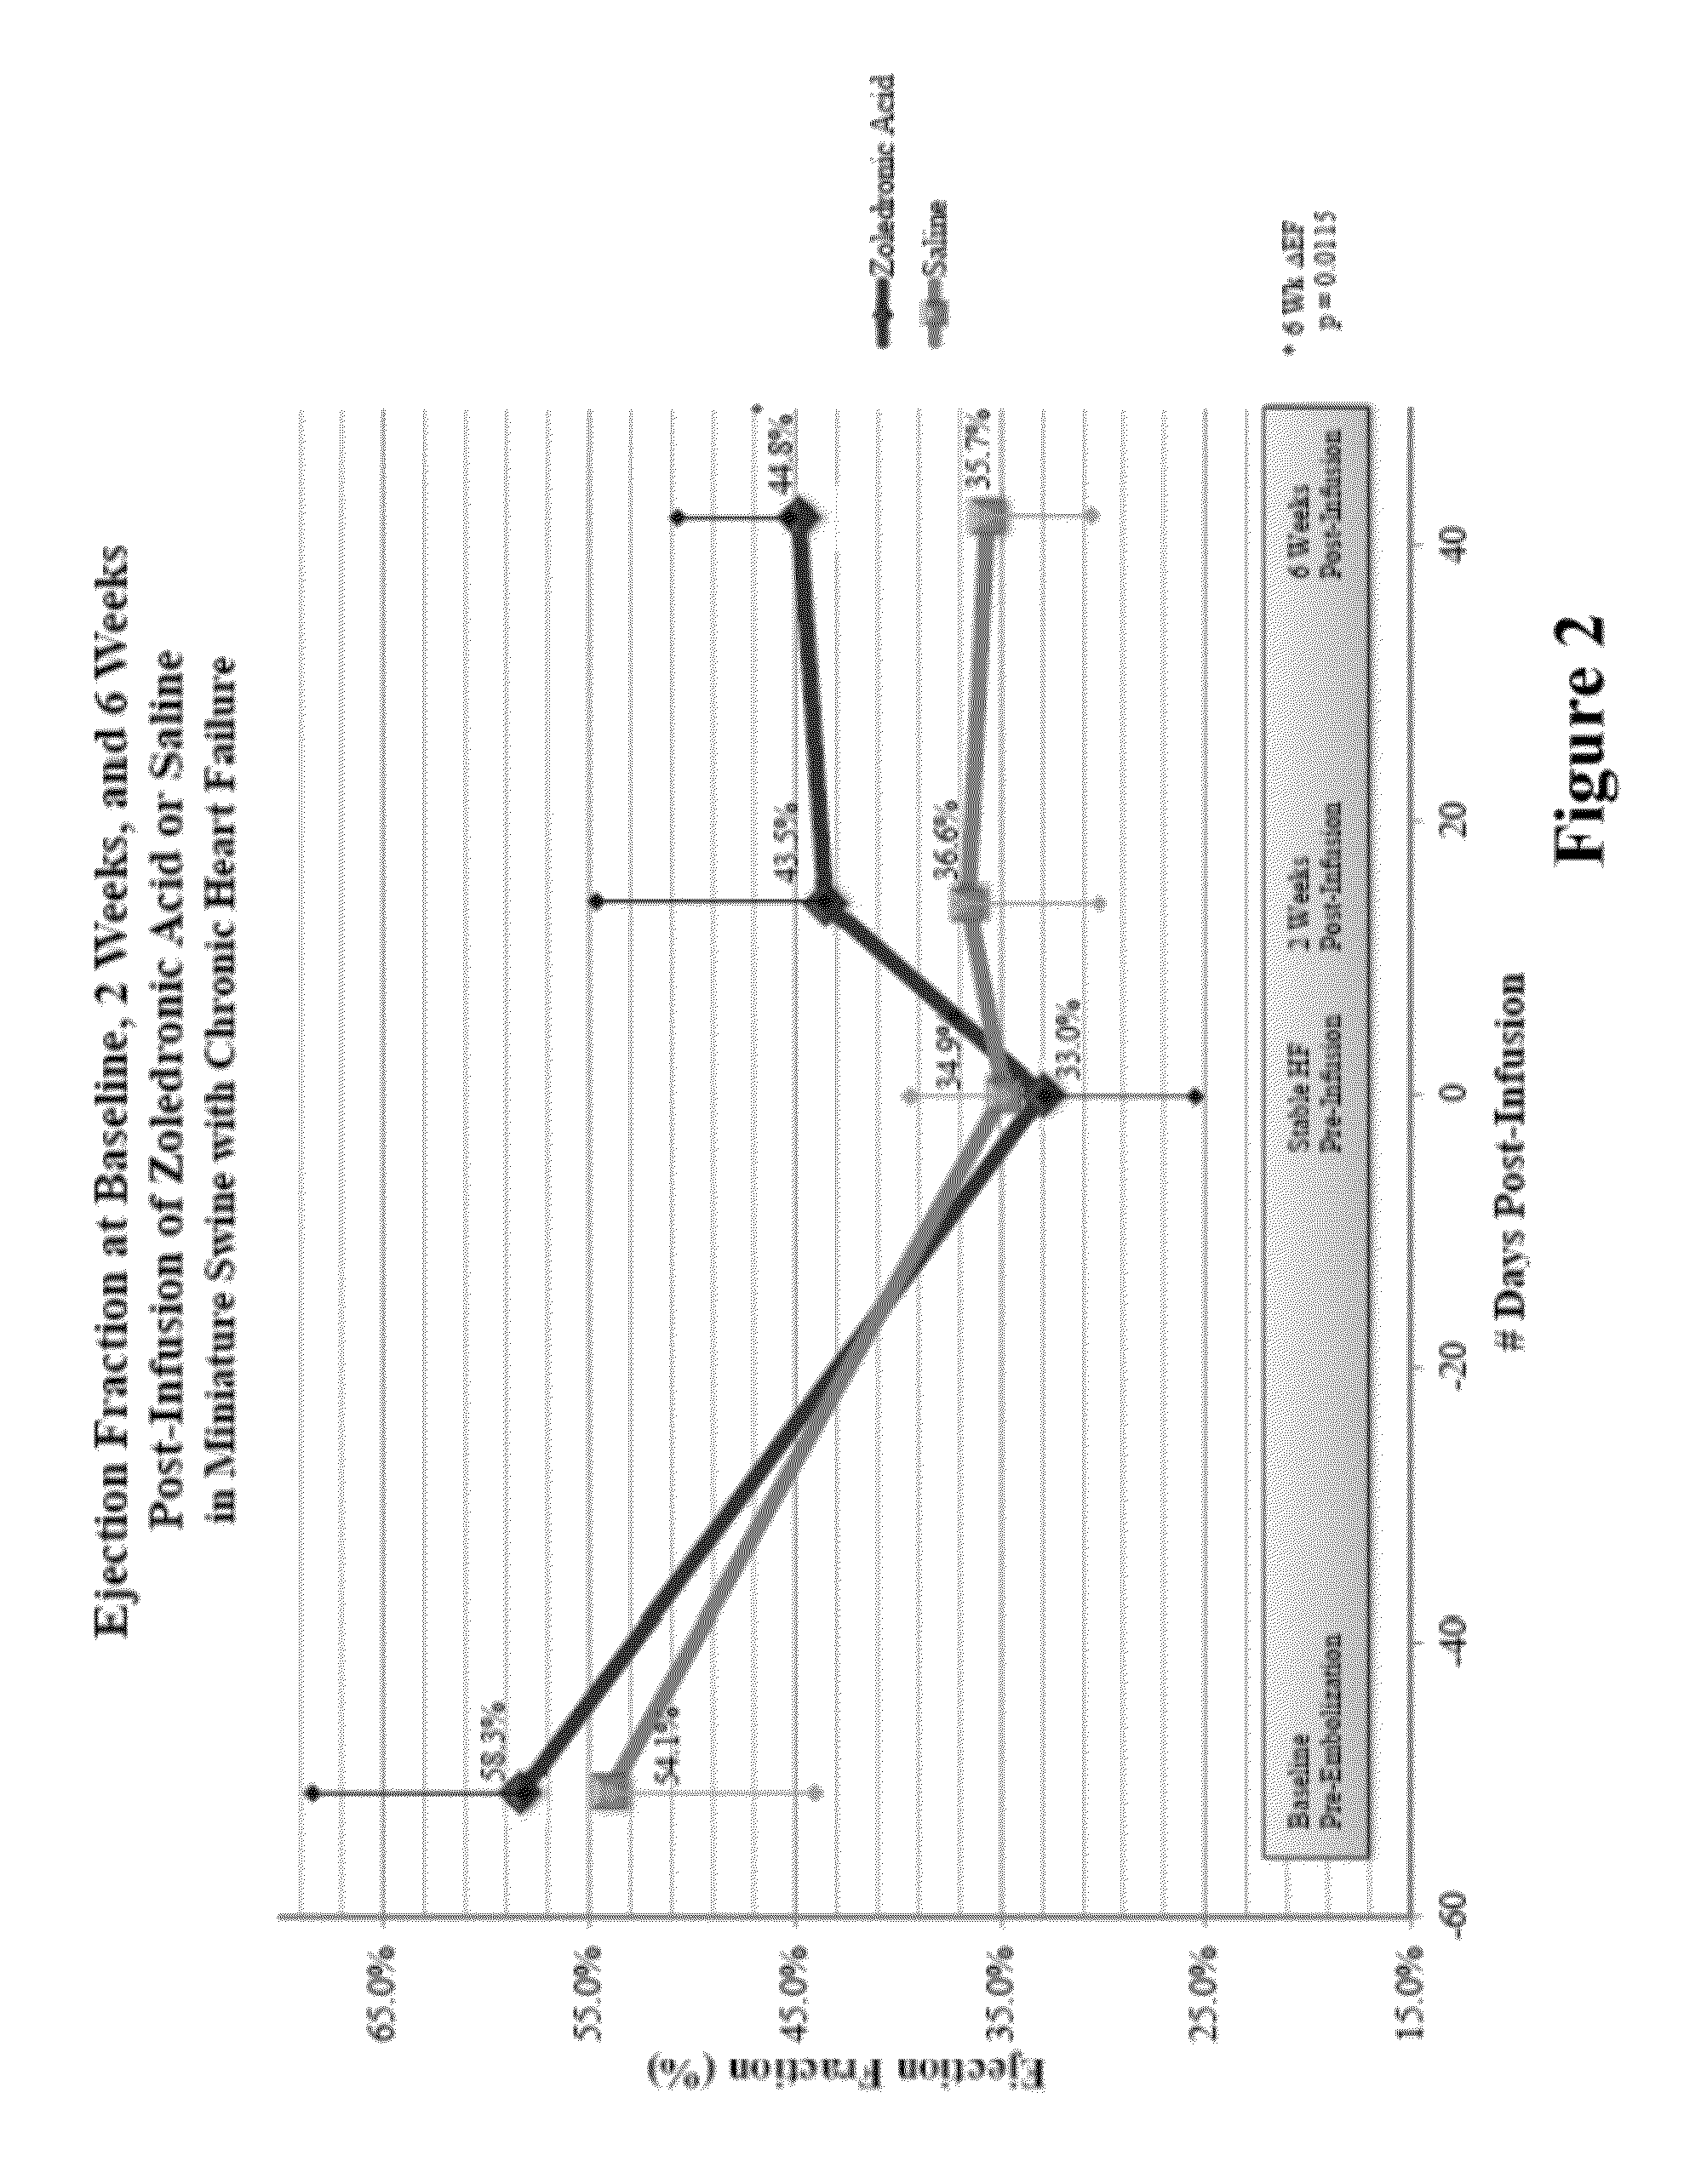 Bisphosphonate compositions and methods for treating heart failure